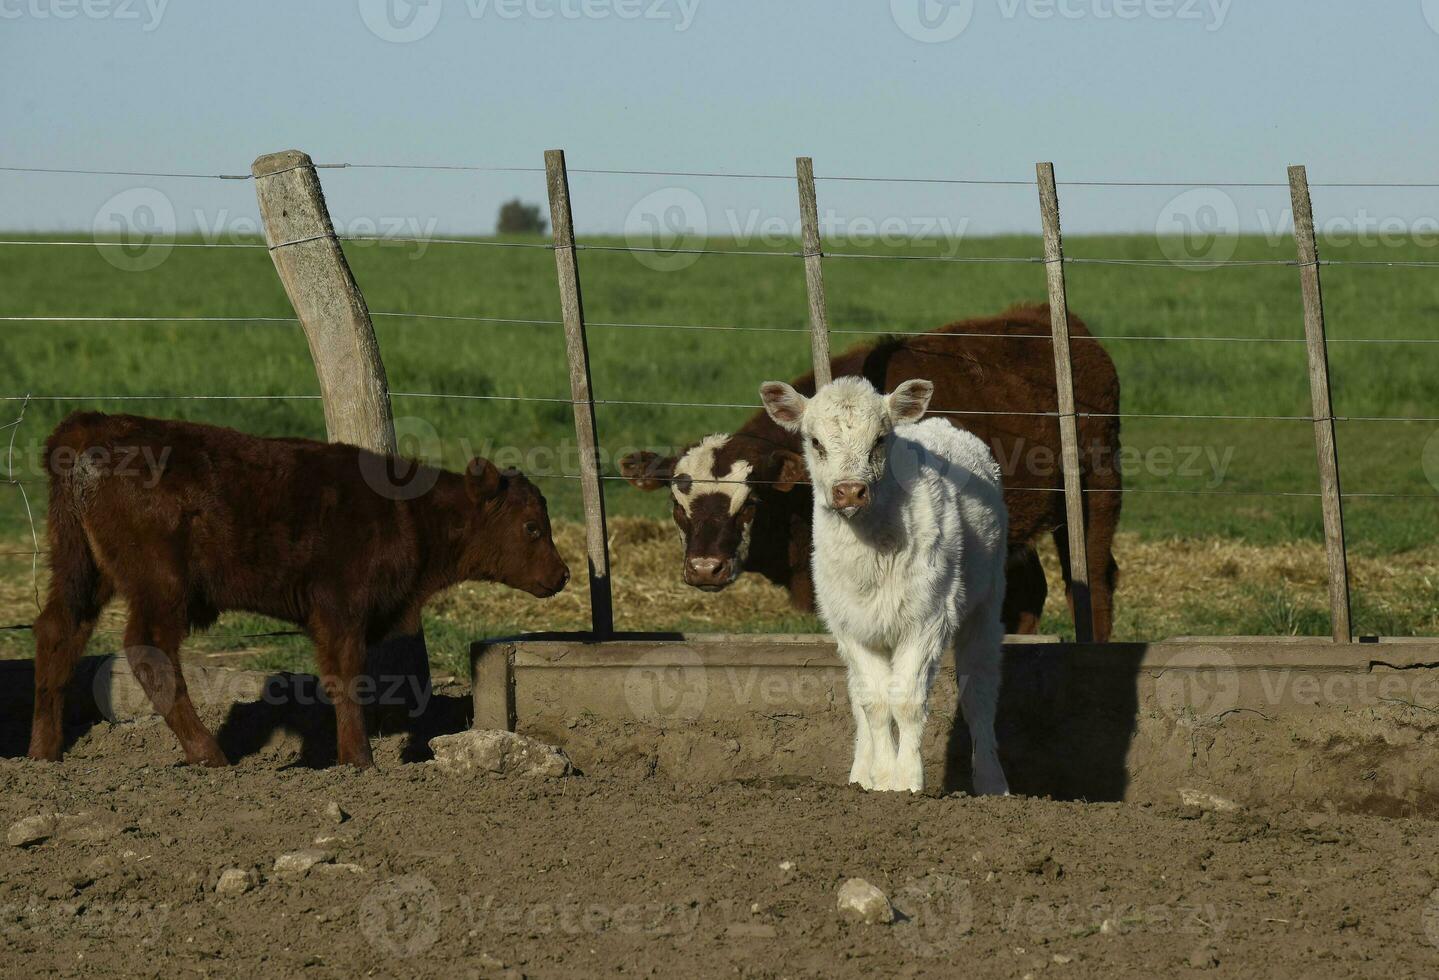 White Shorthorn calf , in Argentine countryside, La Pampa province, Patagonia, Argentina. photo